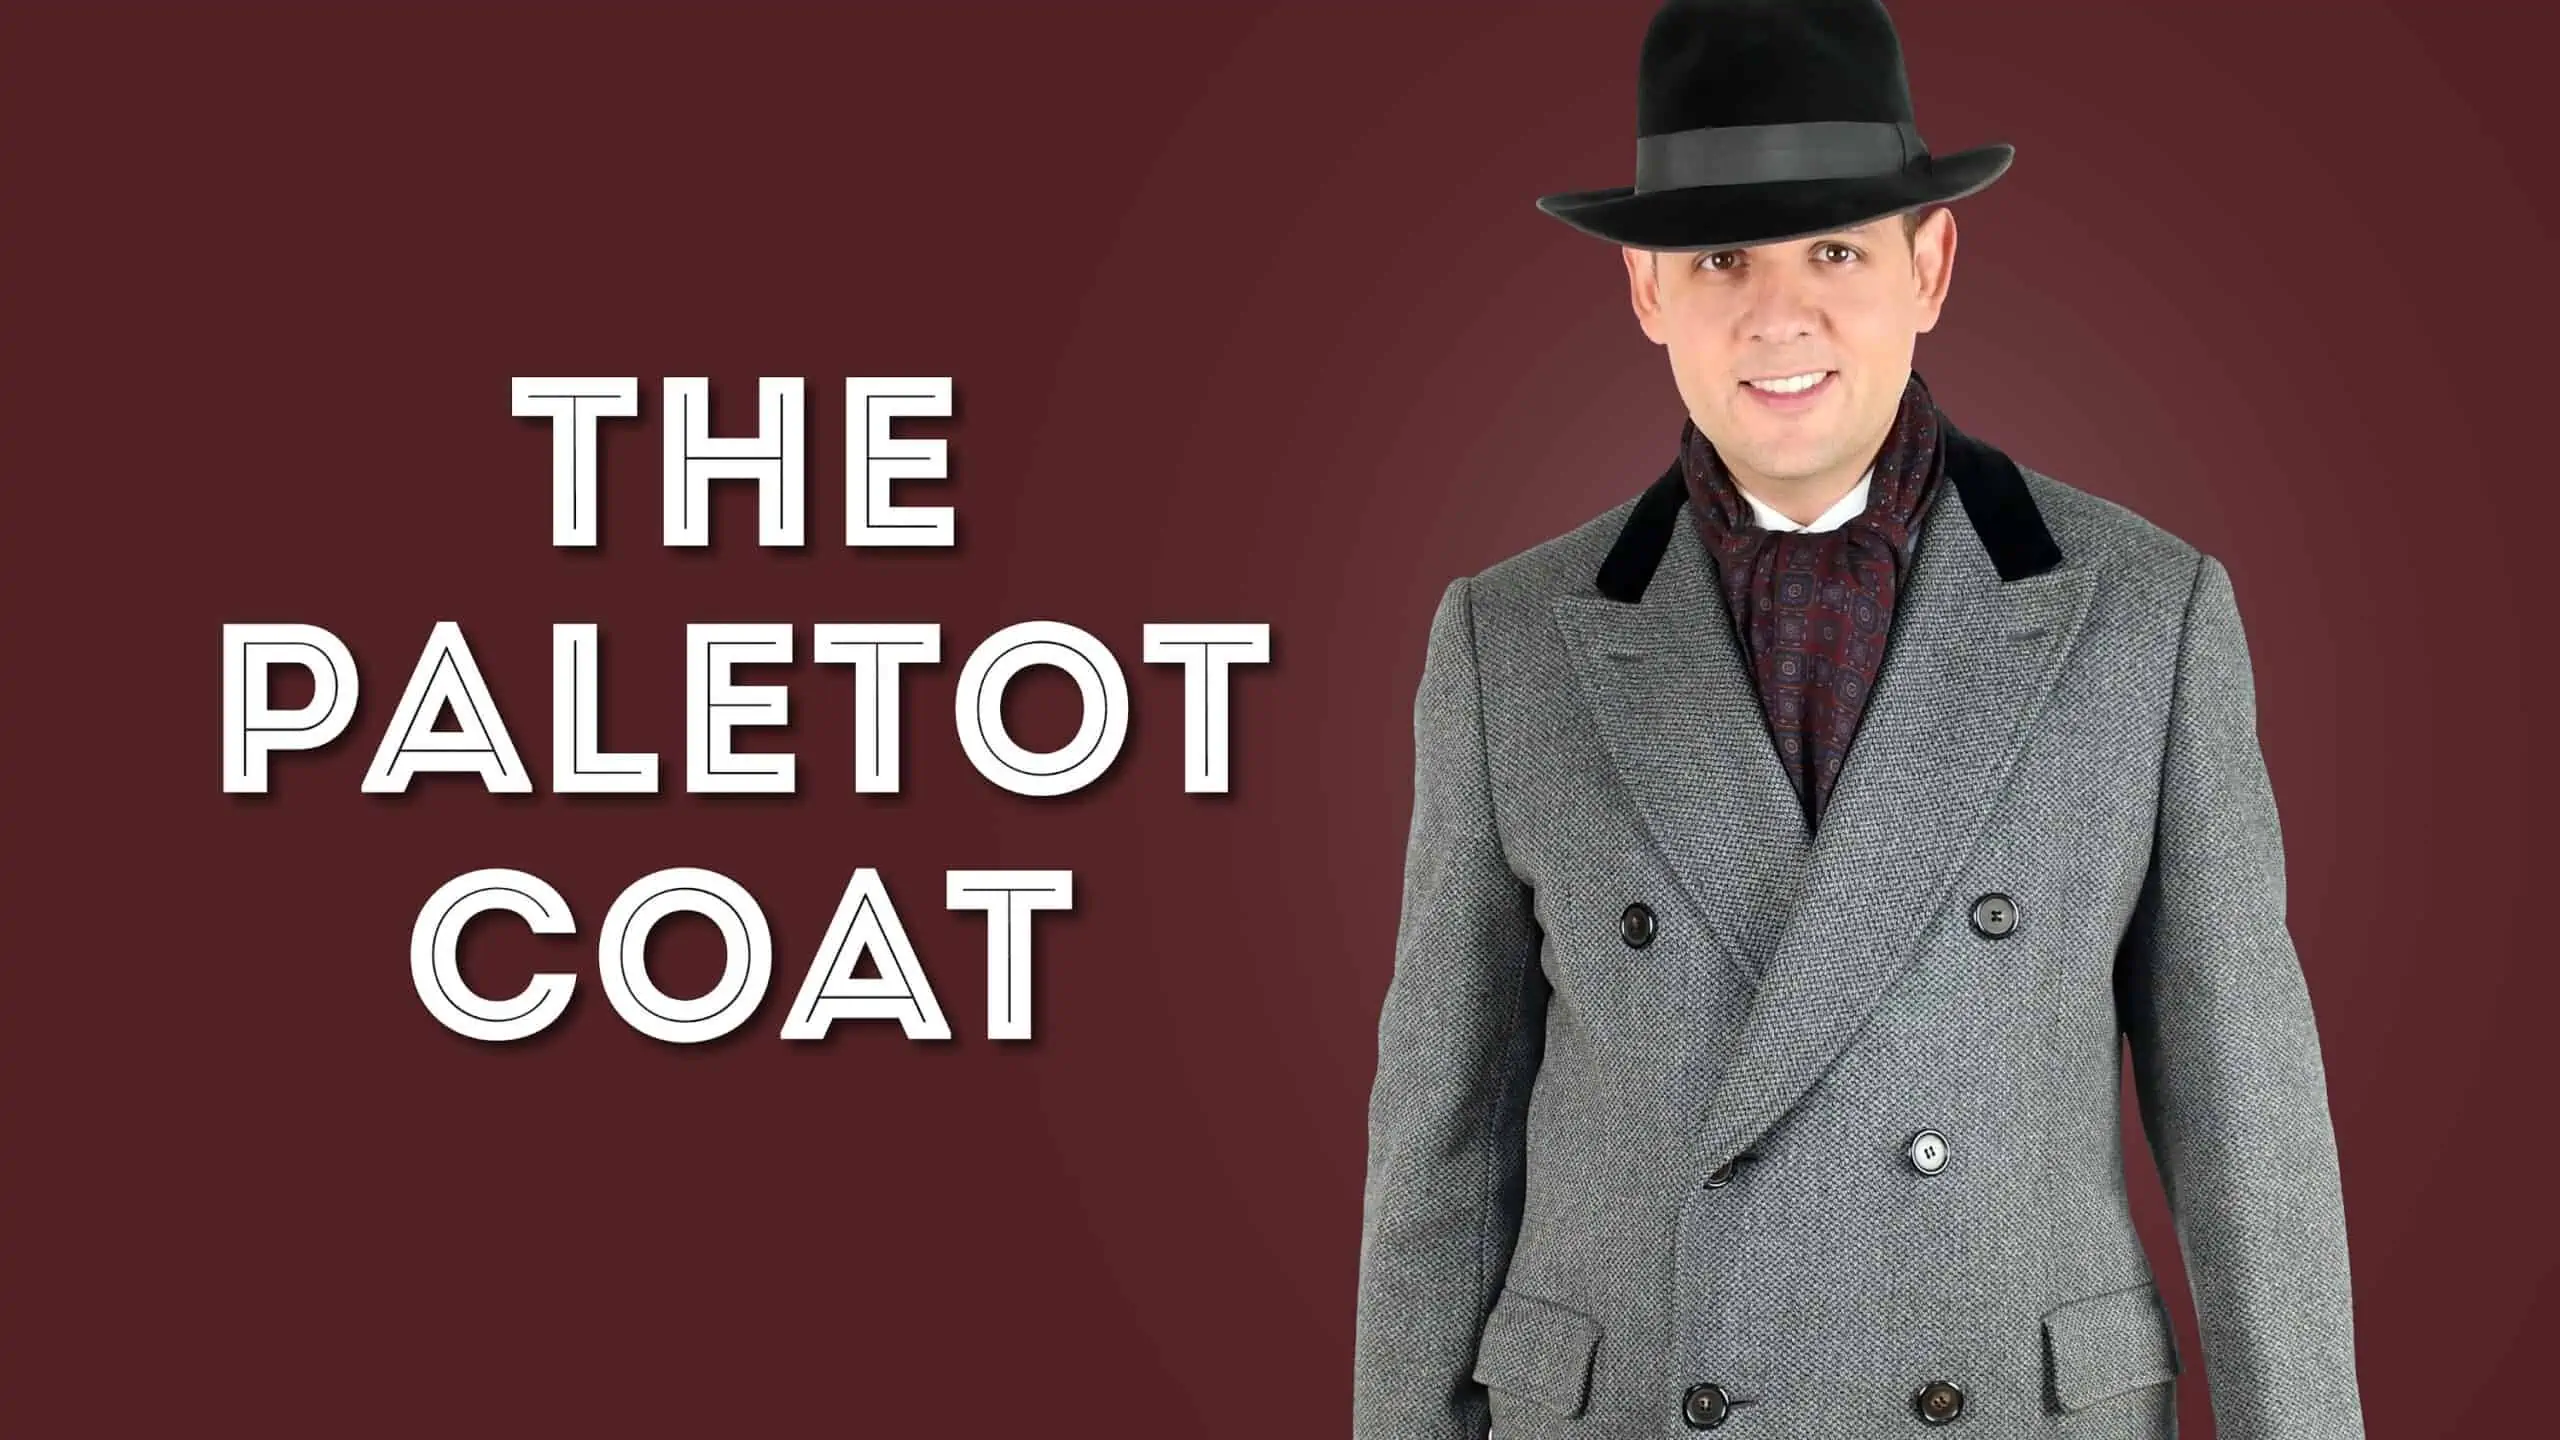 Paletot - The Double Breasted Overcoat